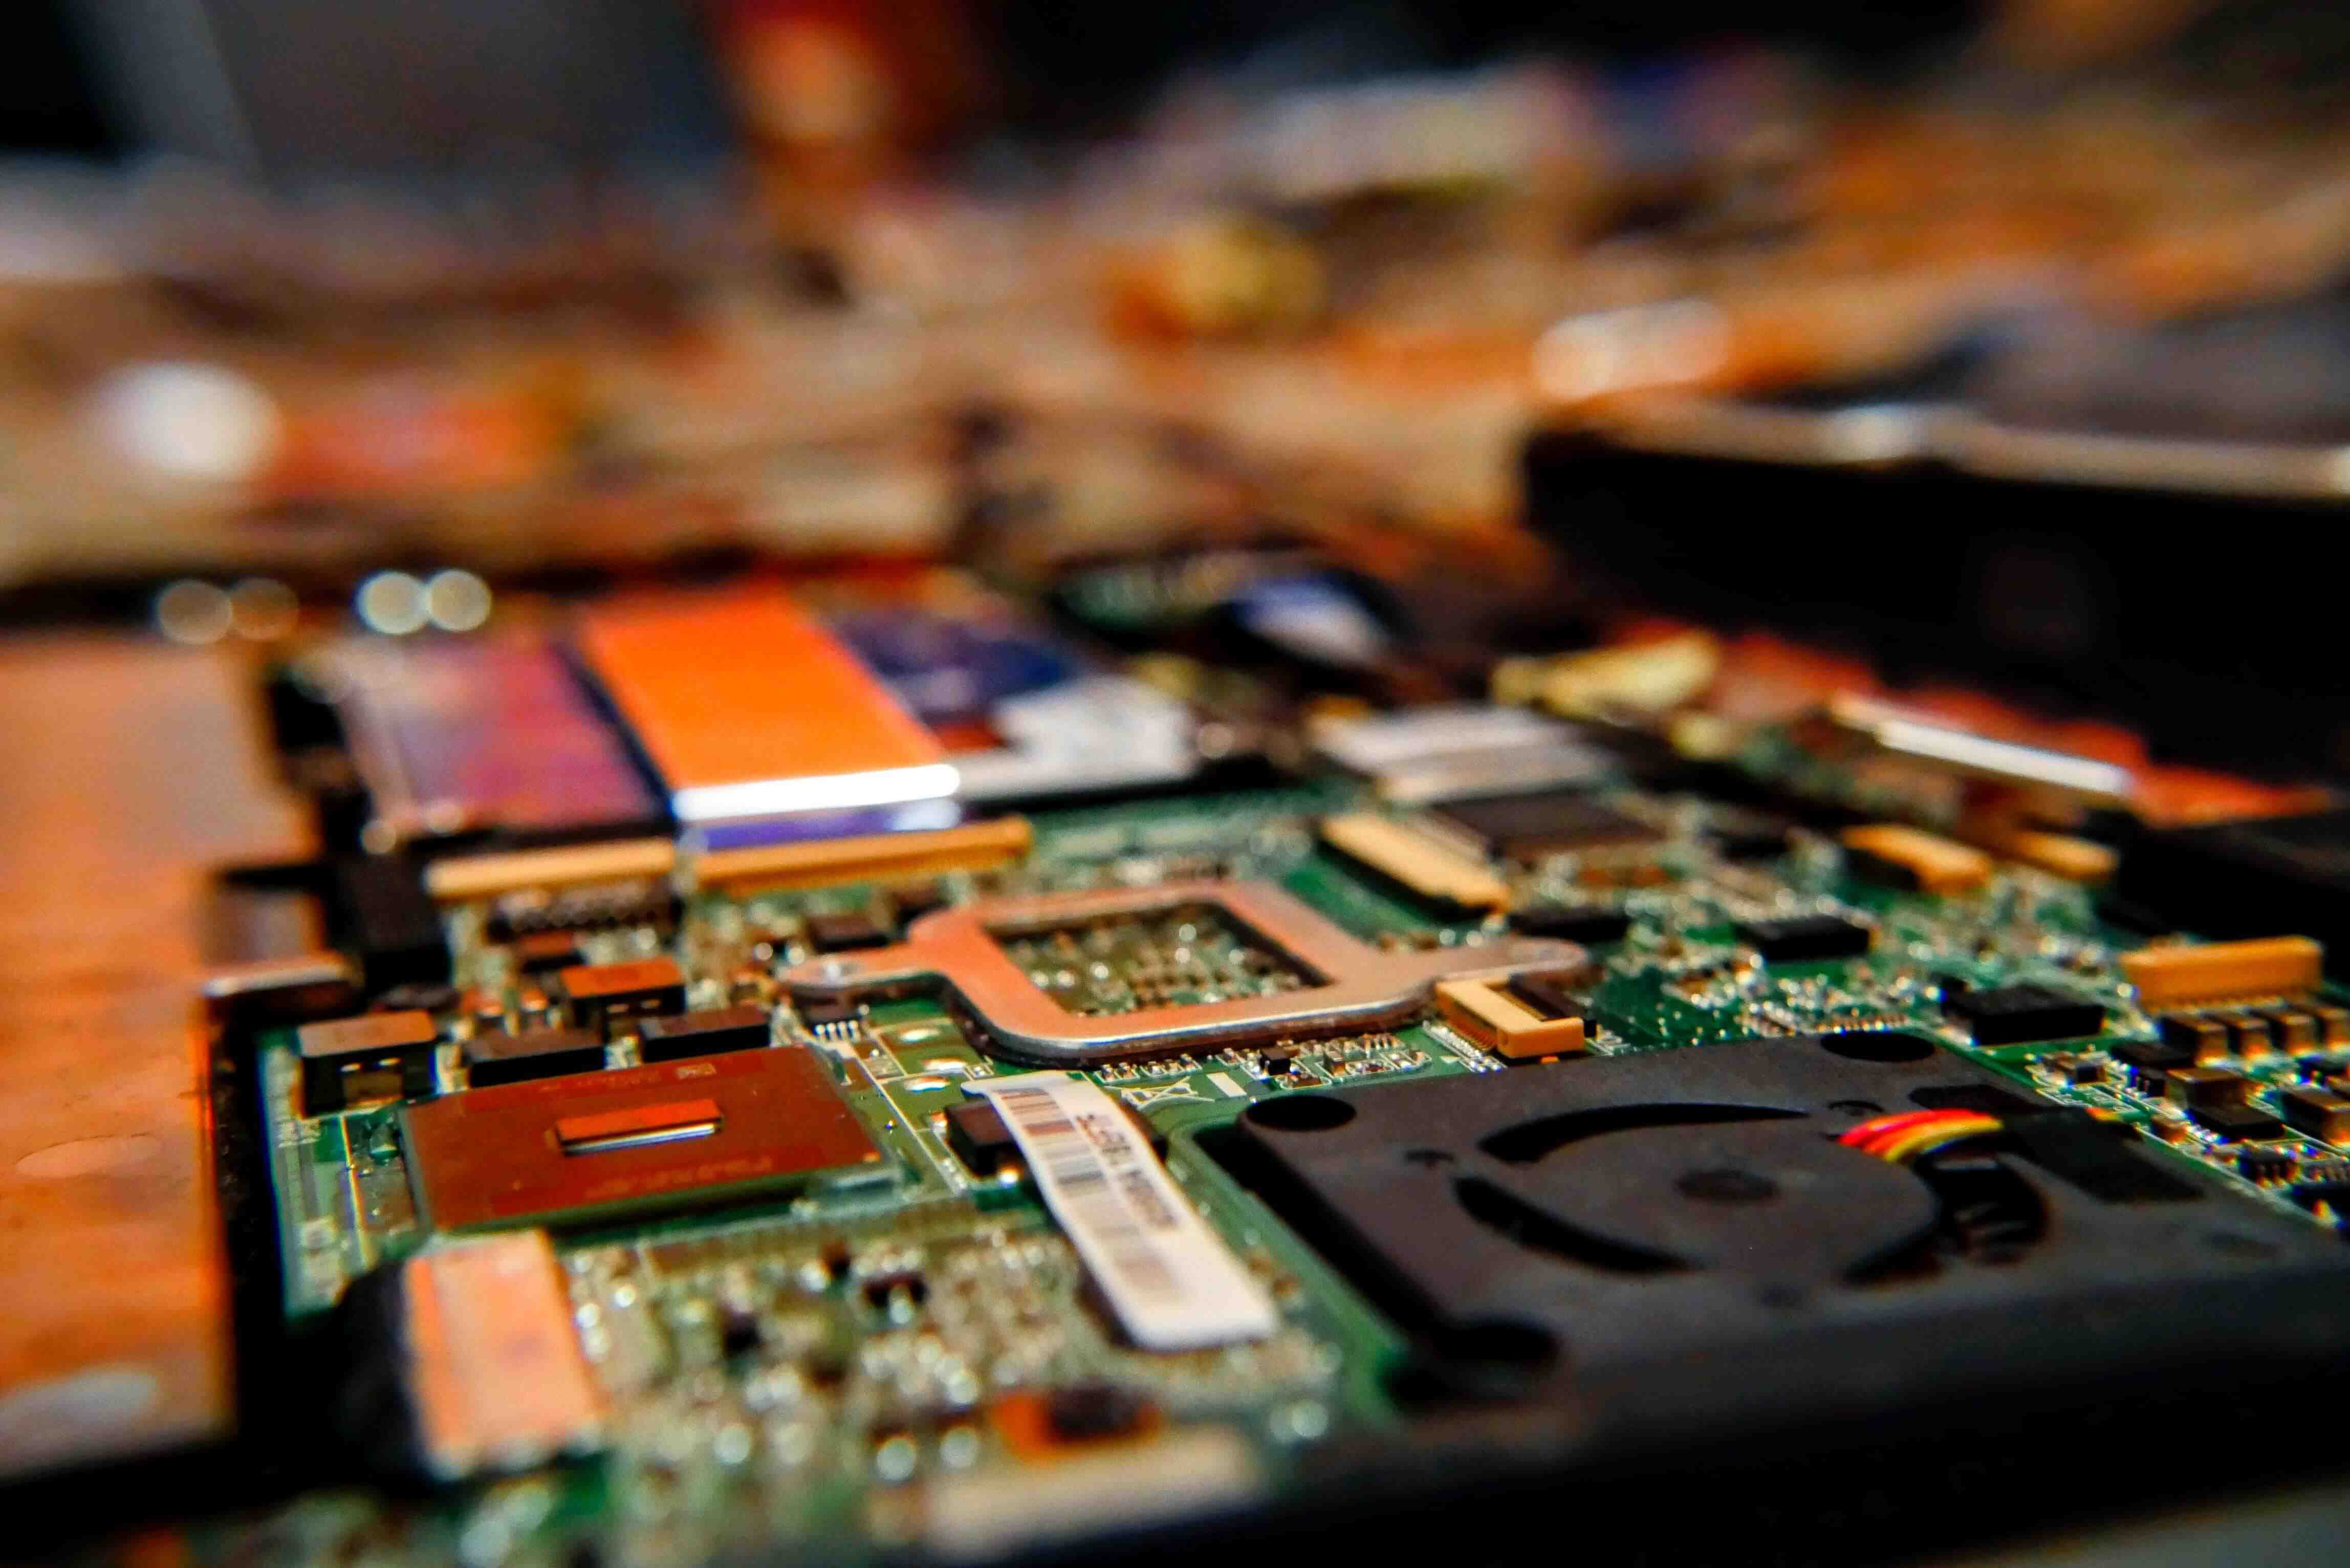 The image showcases a close-up view of a green computer motherboard on a wooden table. It features mounted electronic components, including a CPU chip, a heatsink or fan, and connected red and black wires. The setting suggests a technical atmosphere, possibly a workshop or laboratory dedicated to electronic device repair, maintenance, or study.